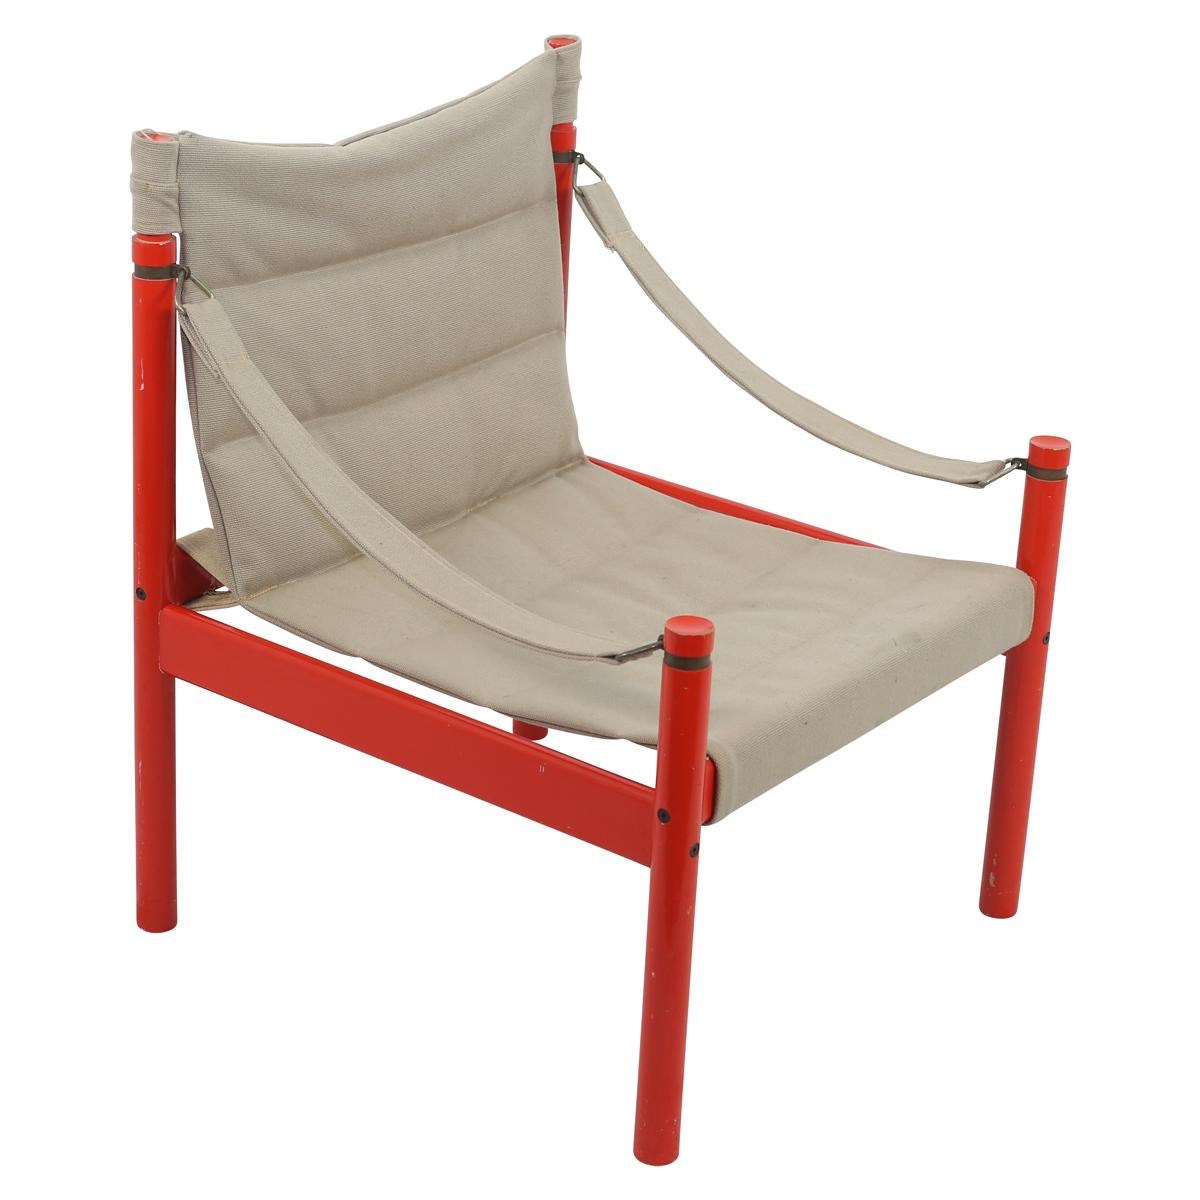 Unusual Scandinavian safari chair with red hi gloss wood painted frame and natural canvas fabric seat and back.